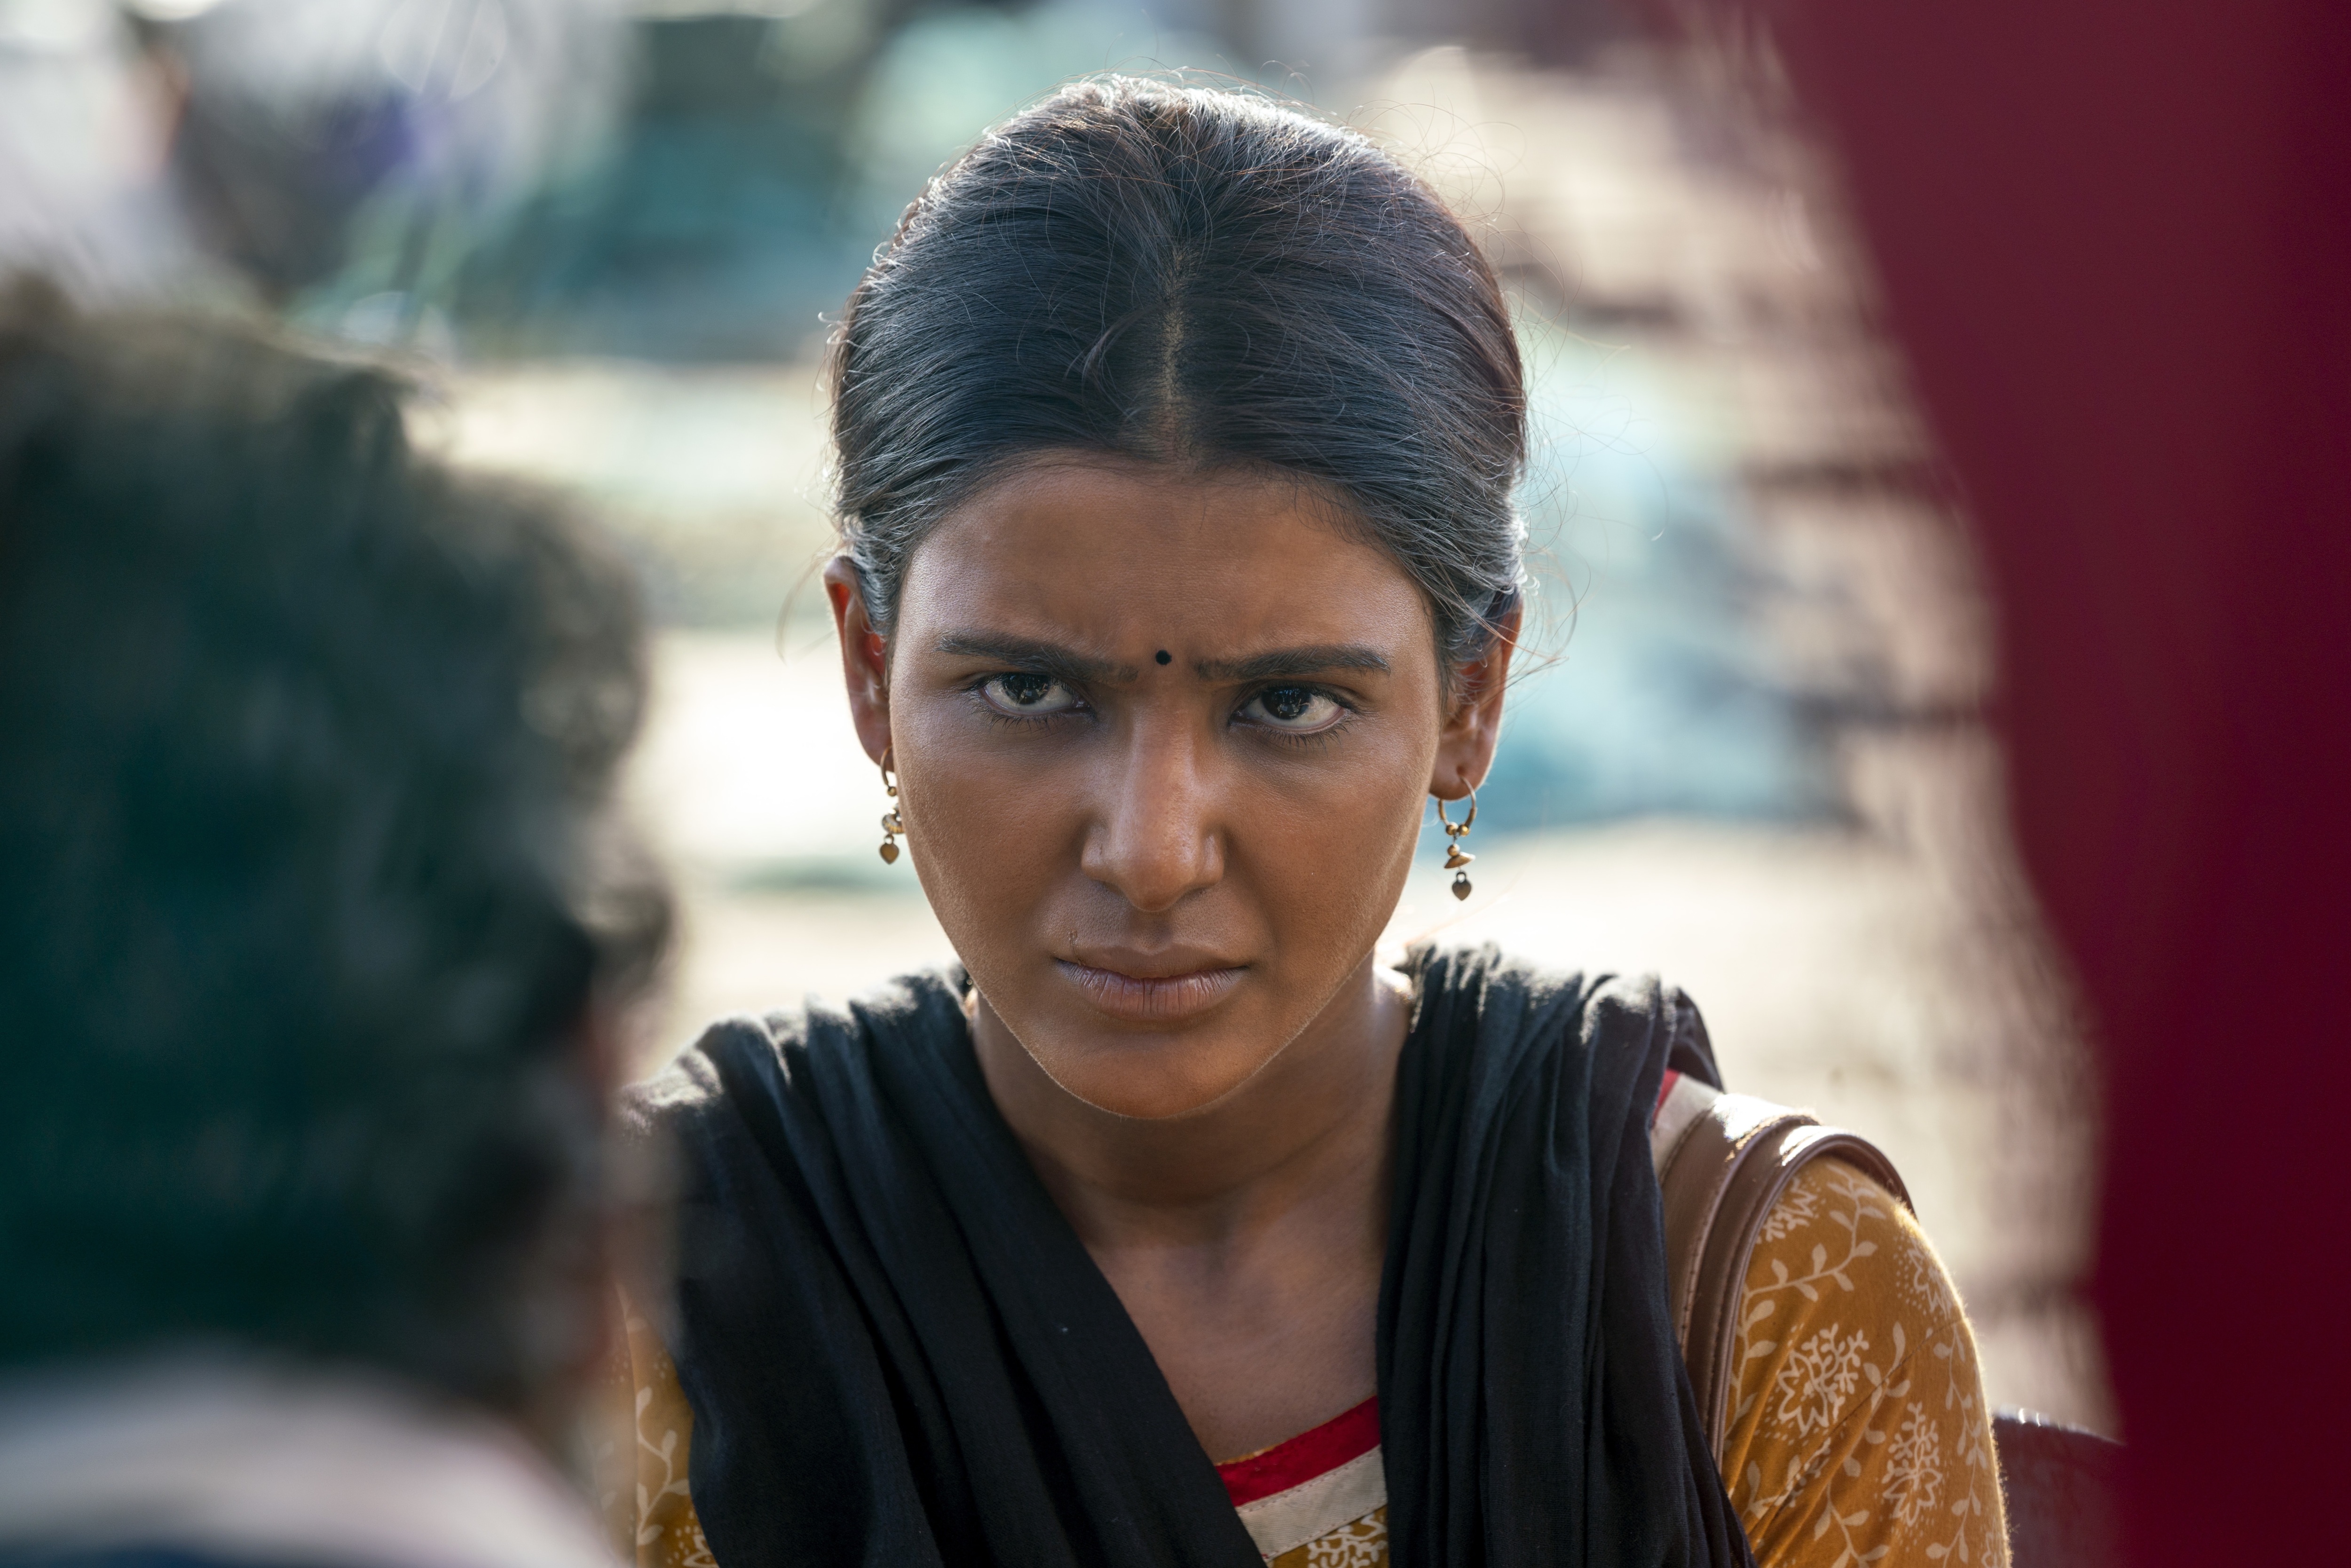 Samantha Akkineni doesn't let glaring brown face get in the way of her largely silent performance in The Family Man.